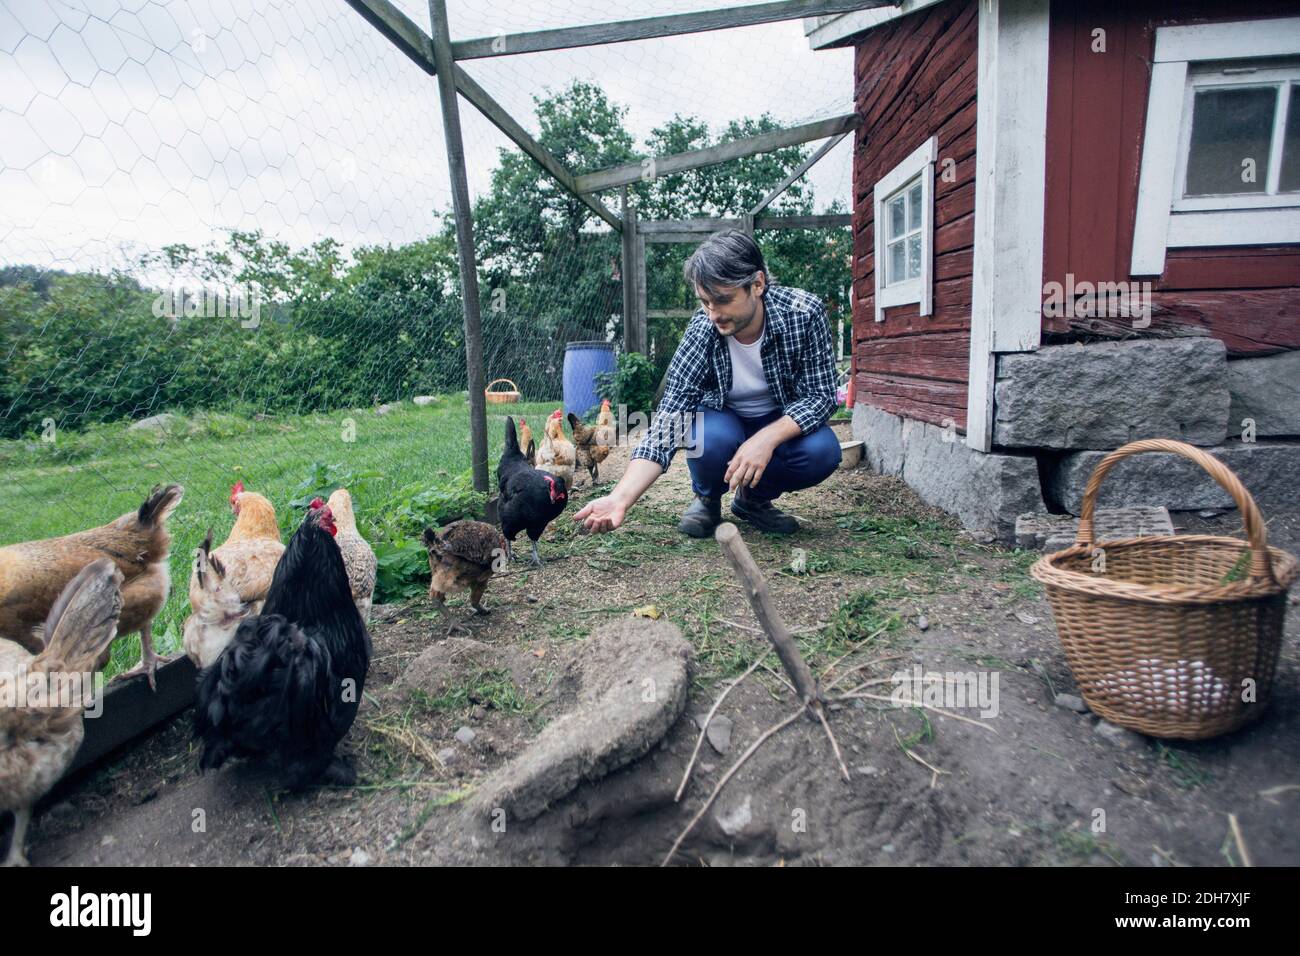 Man feeding chickens at poultry farm Stock Photo